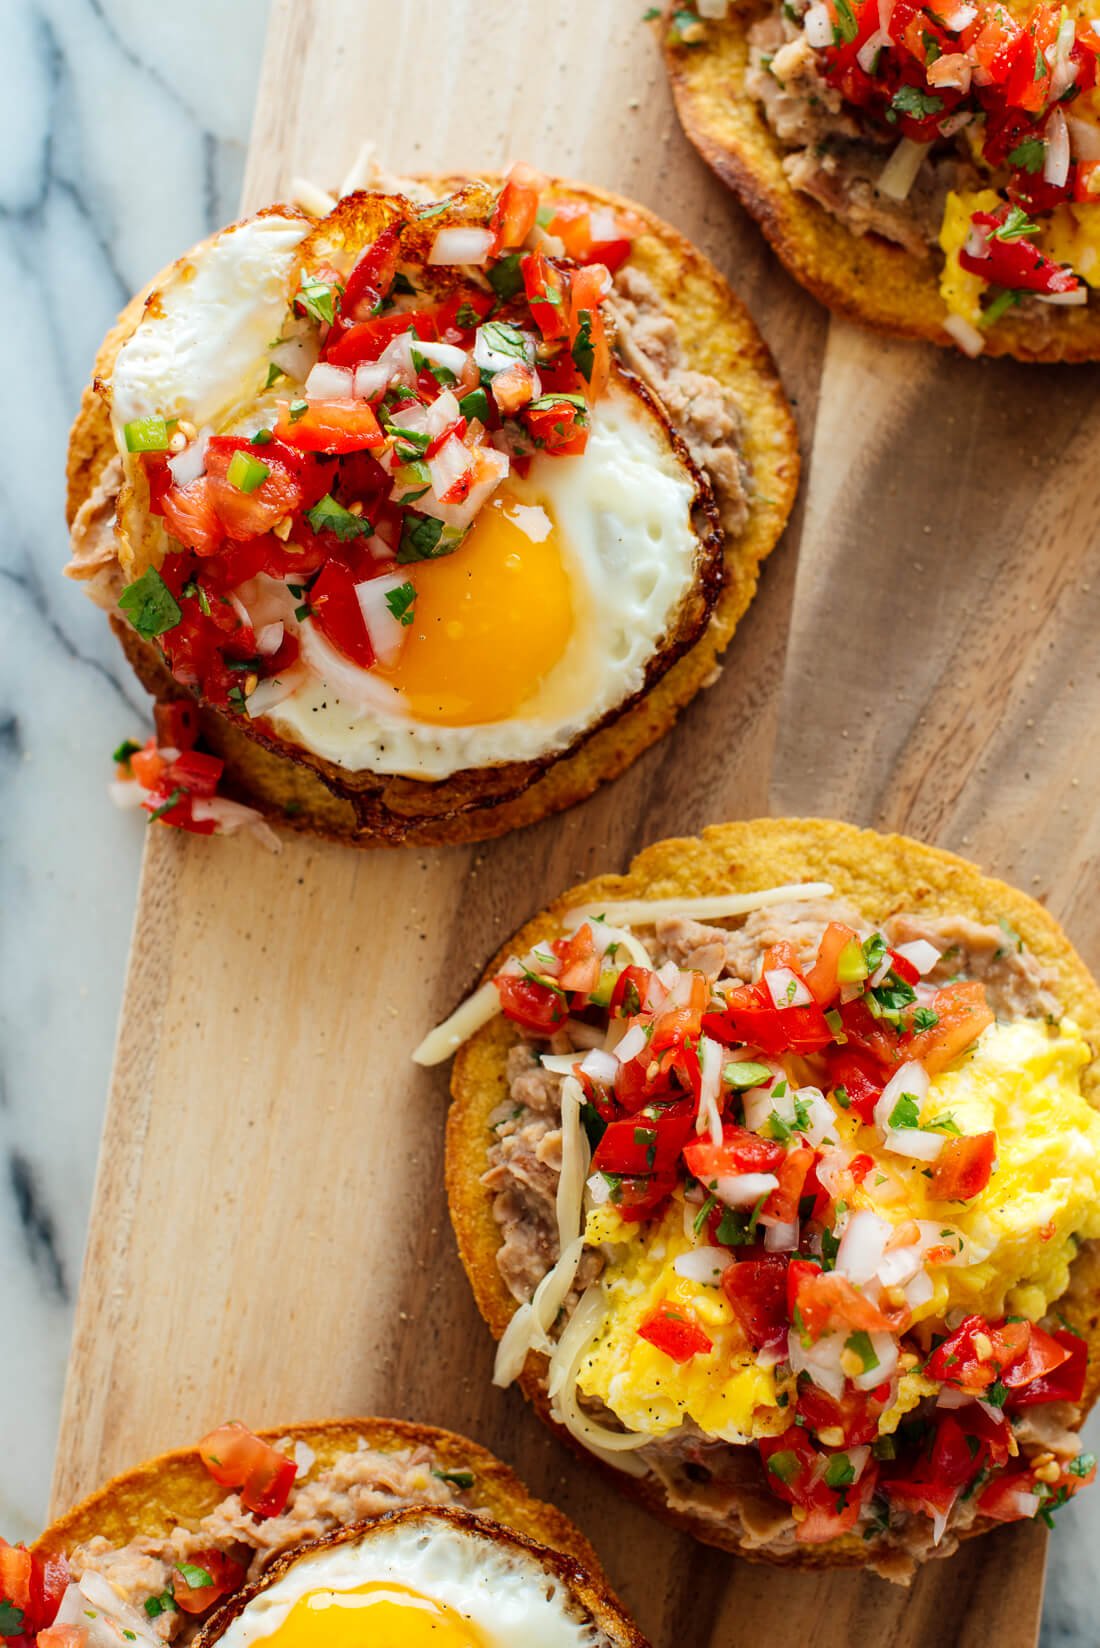 breakfast tostadas with refried beans and pico de gallo